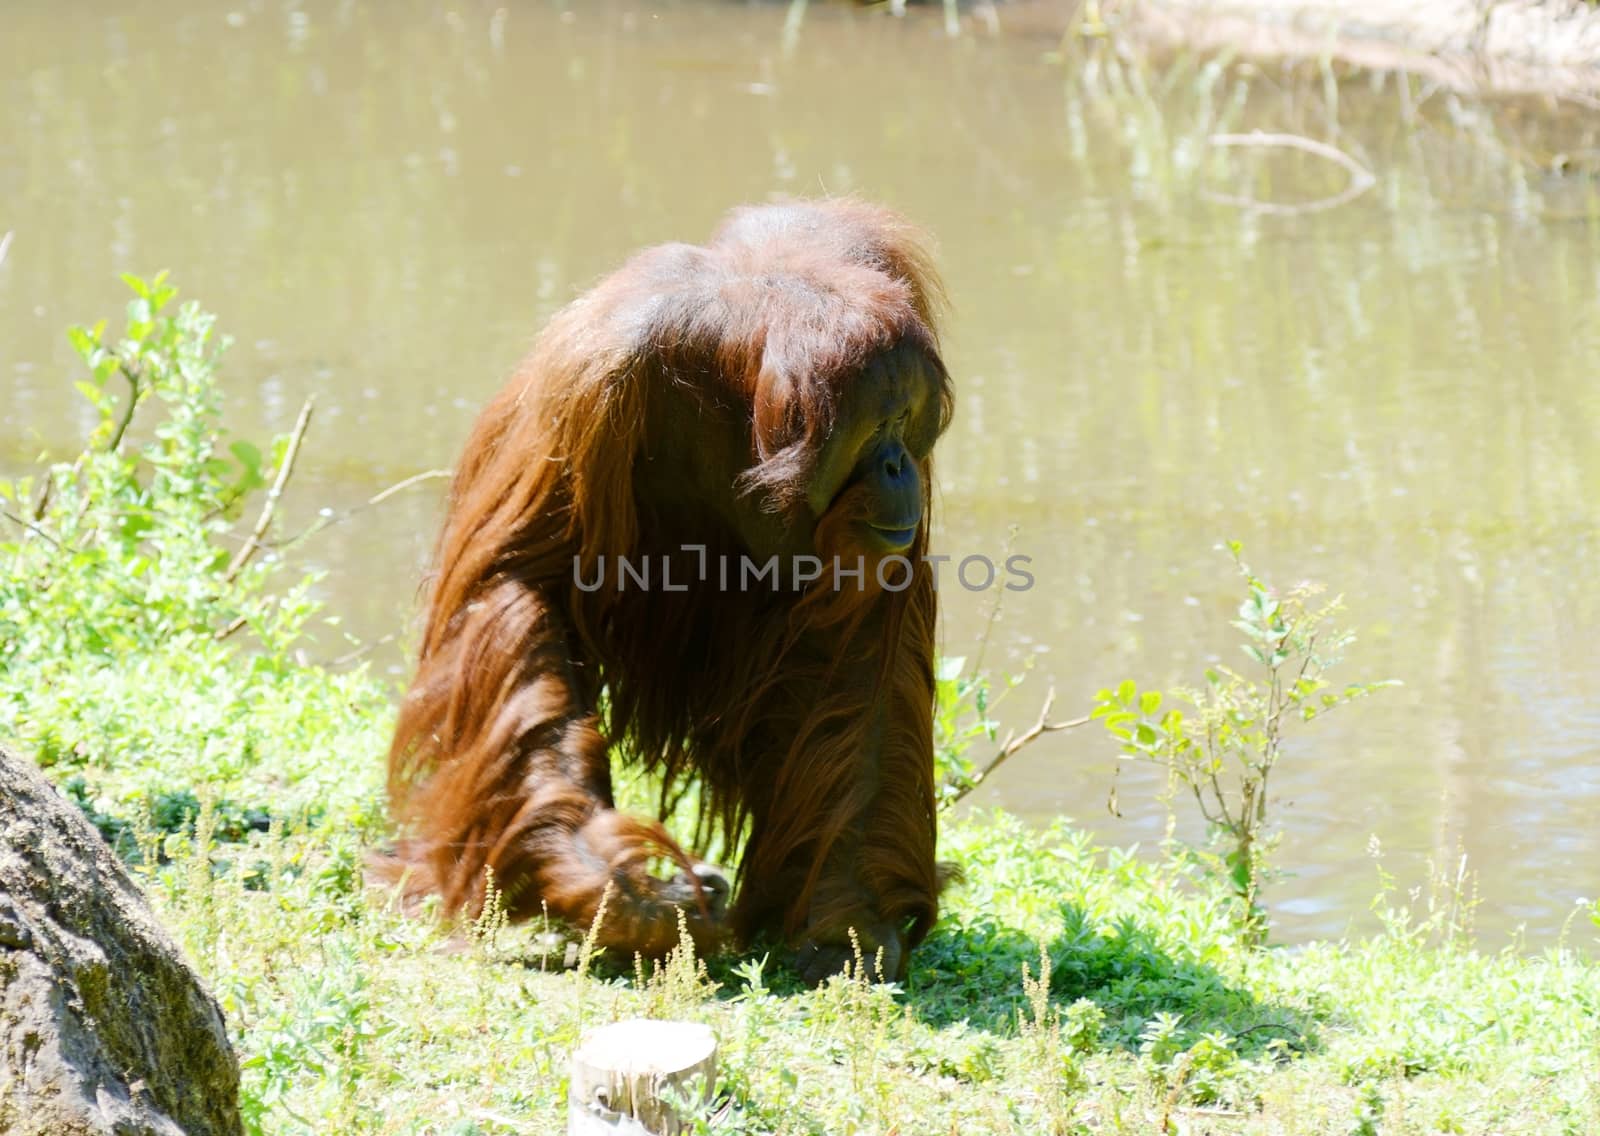 A hairy male orangutan walking alone on an island surrounded by water on a sunny day